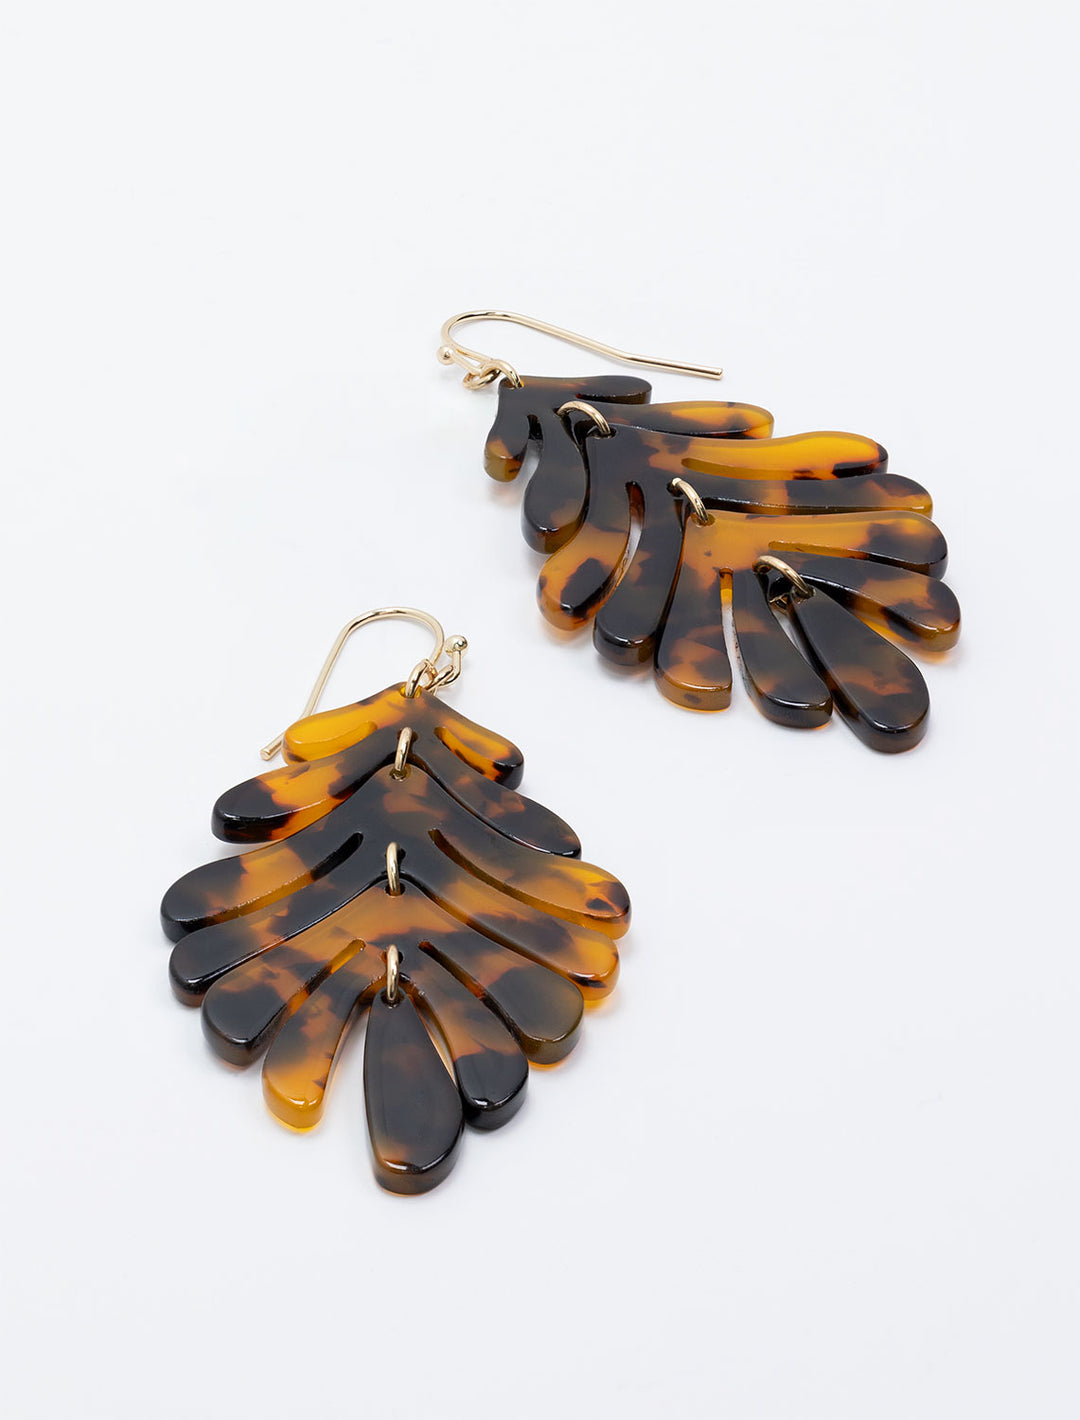 Close-up view of West Eleventh's palm leaf earrings in tortoise.